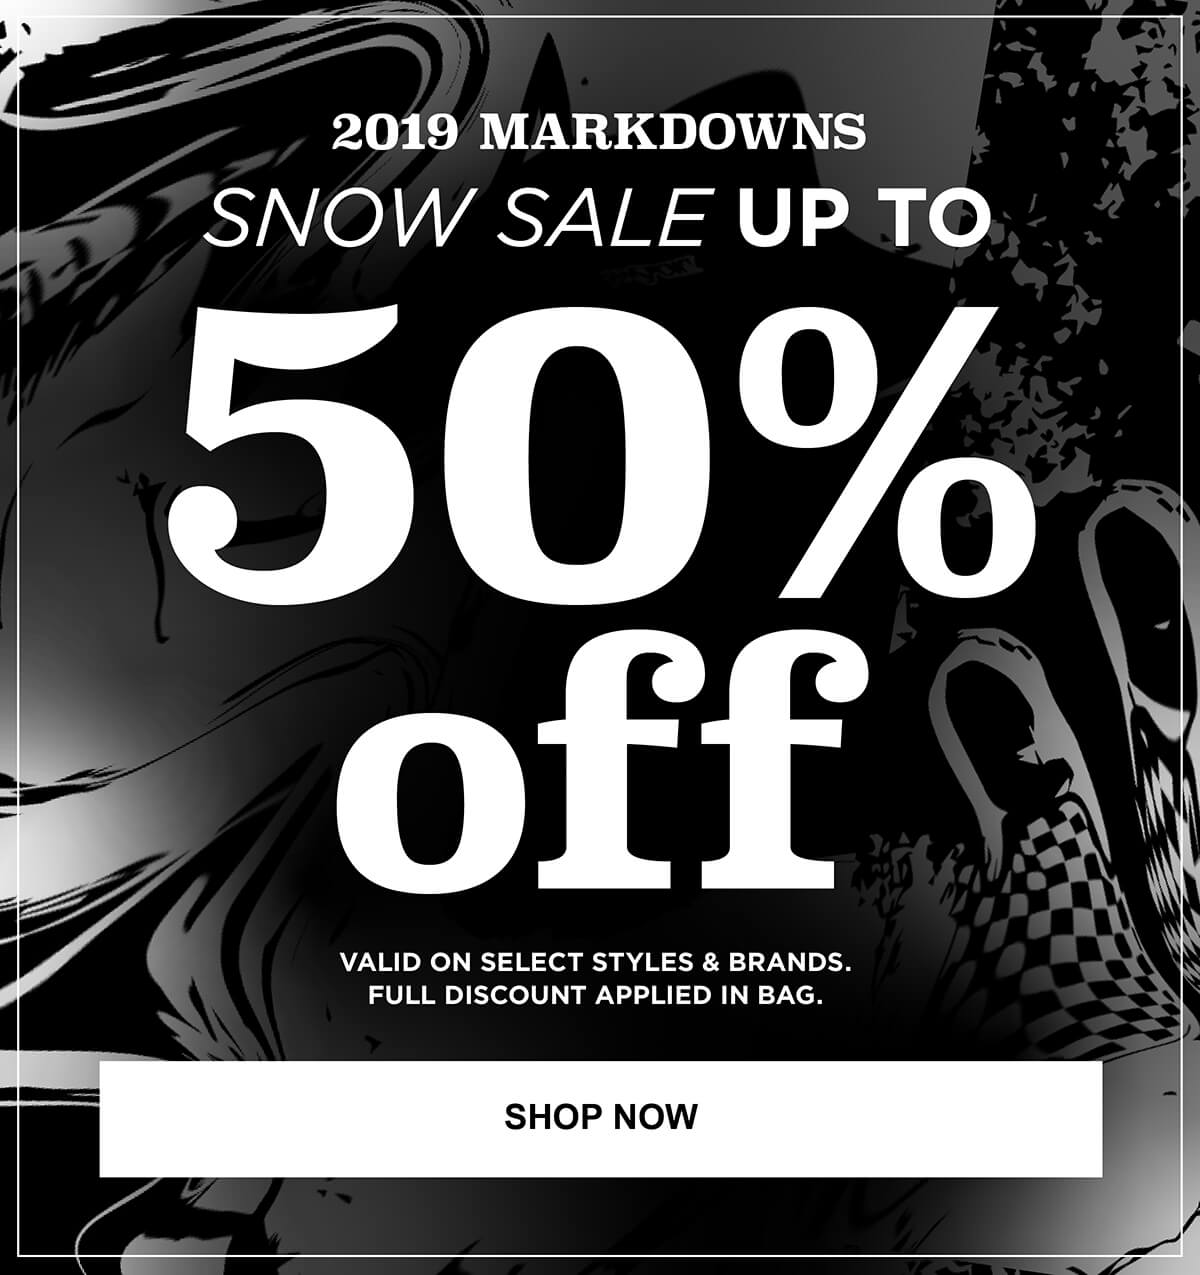 SNOW SALE - UP TO 50% OFF SNOW GEAR